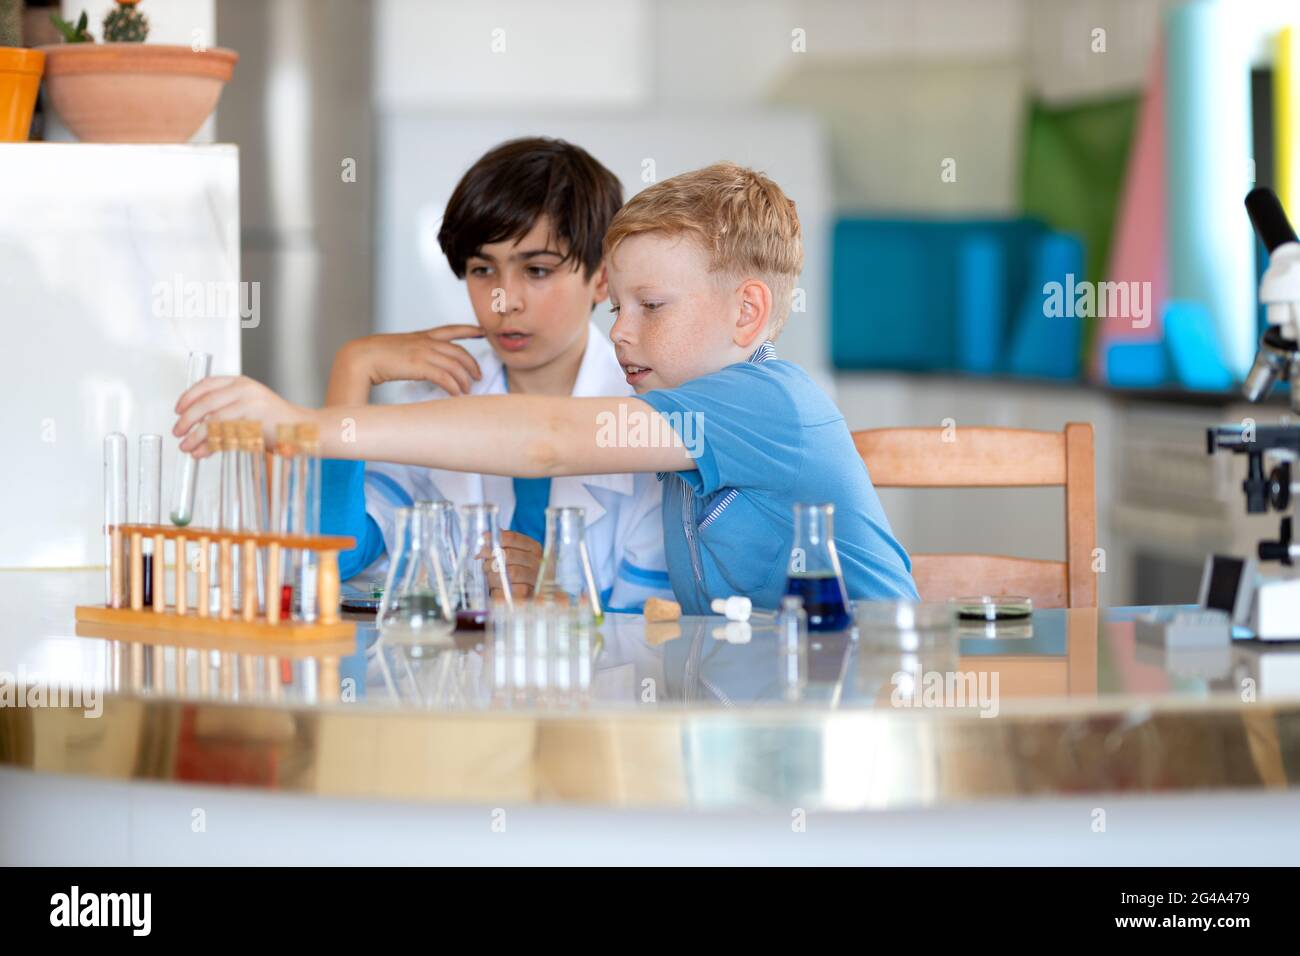 Two laboratory assistants kids carry out experiments with colored liquids Stock Photo